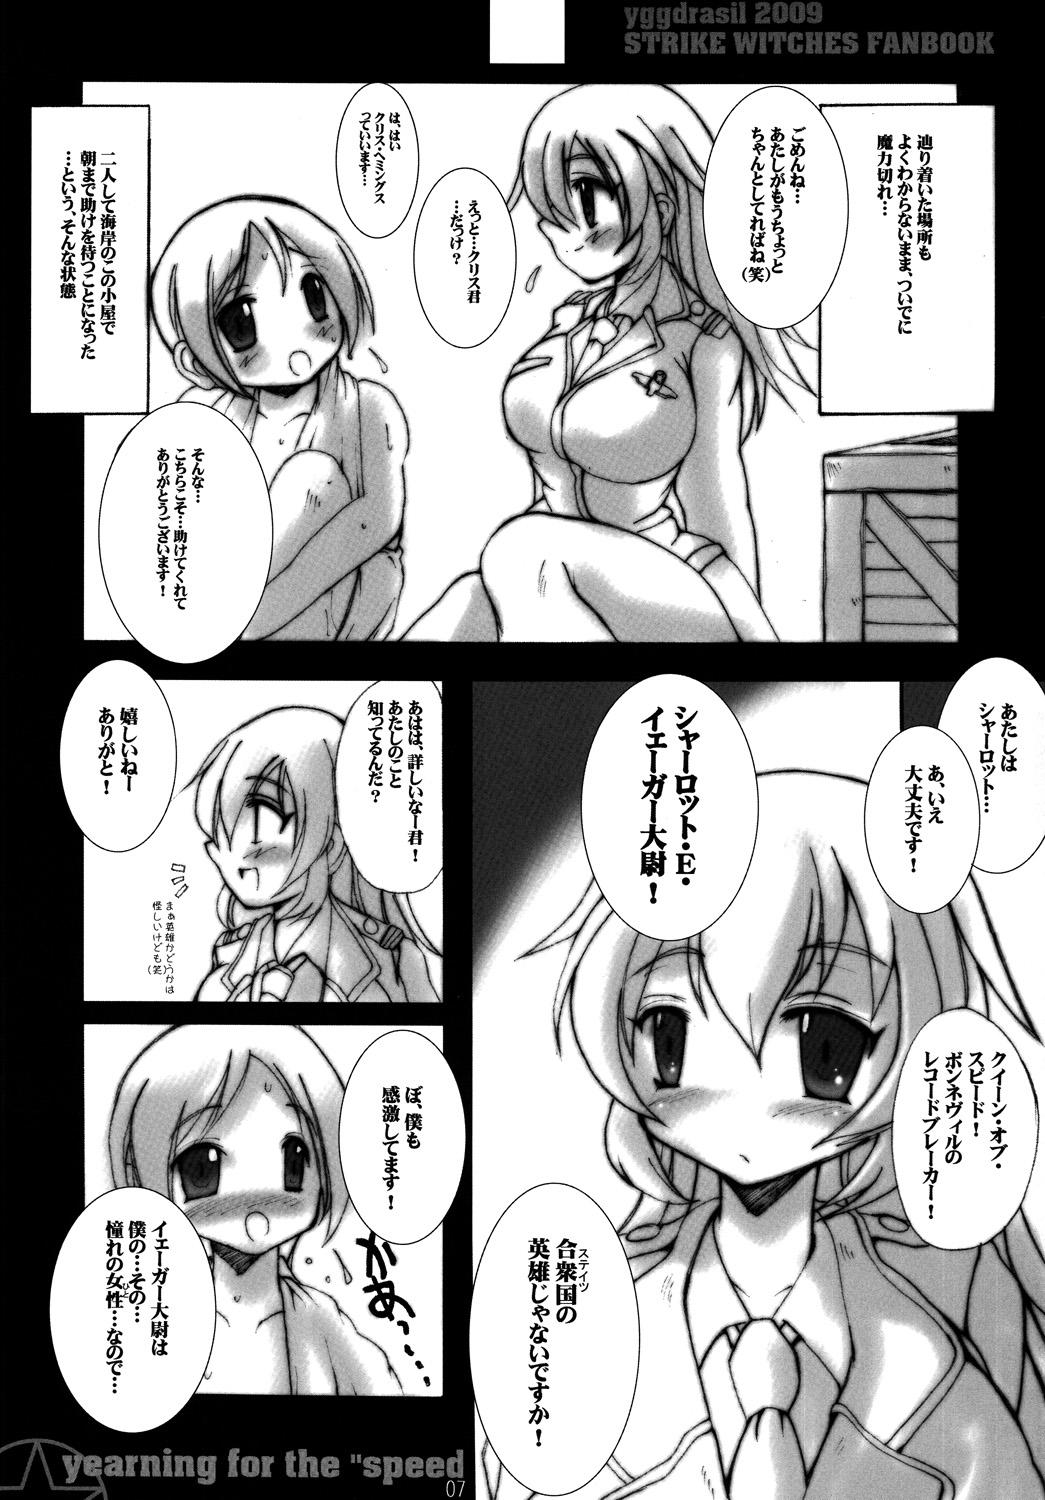 Whatsapp yearning for the “speed” - Strike witches Corno - Page 6